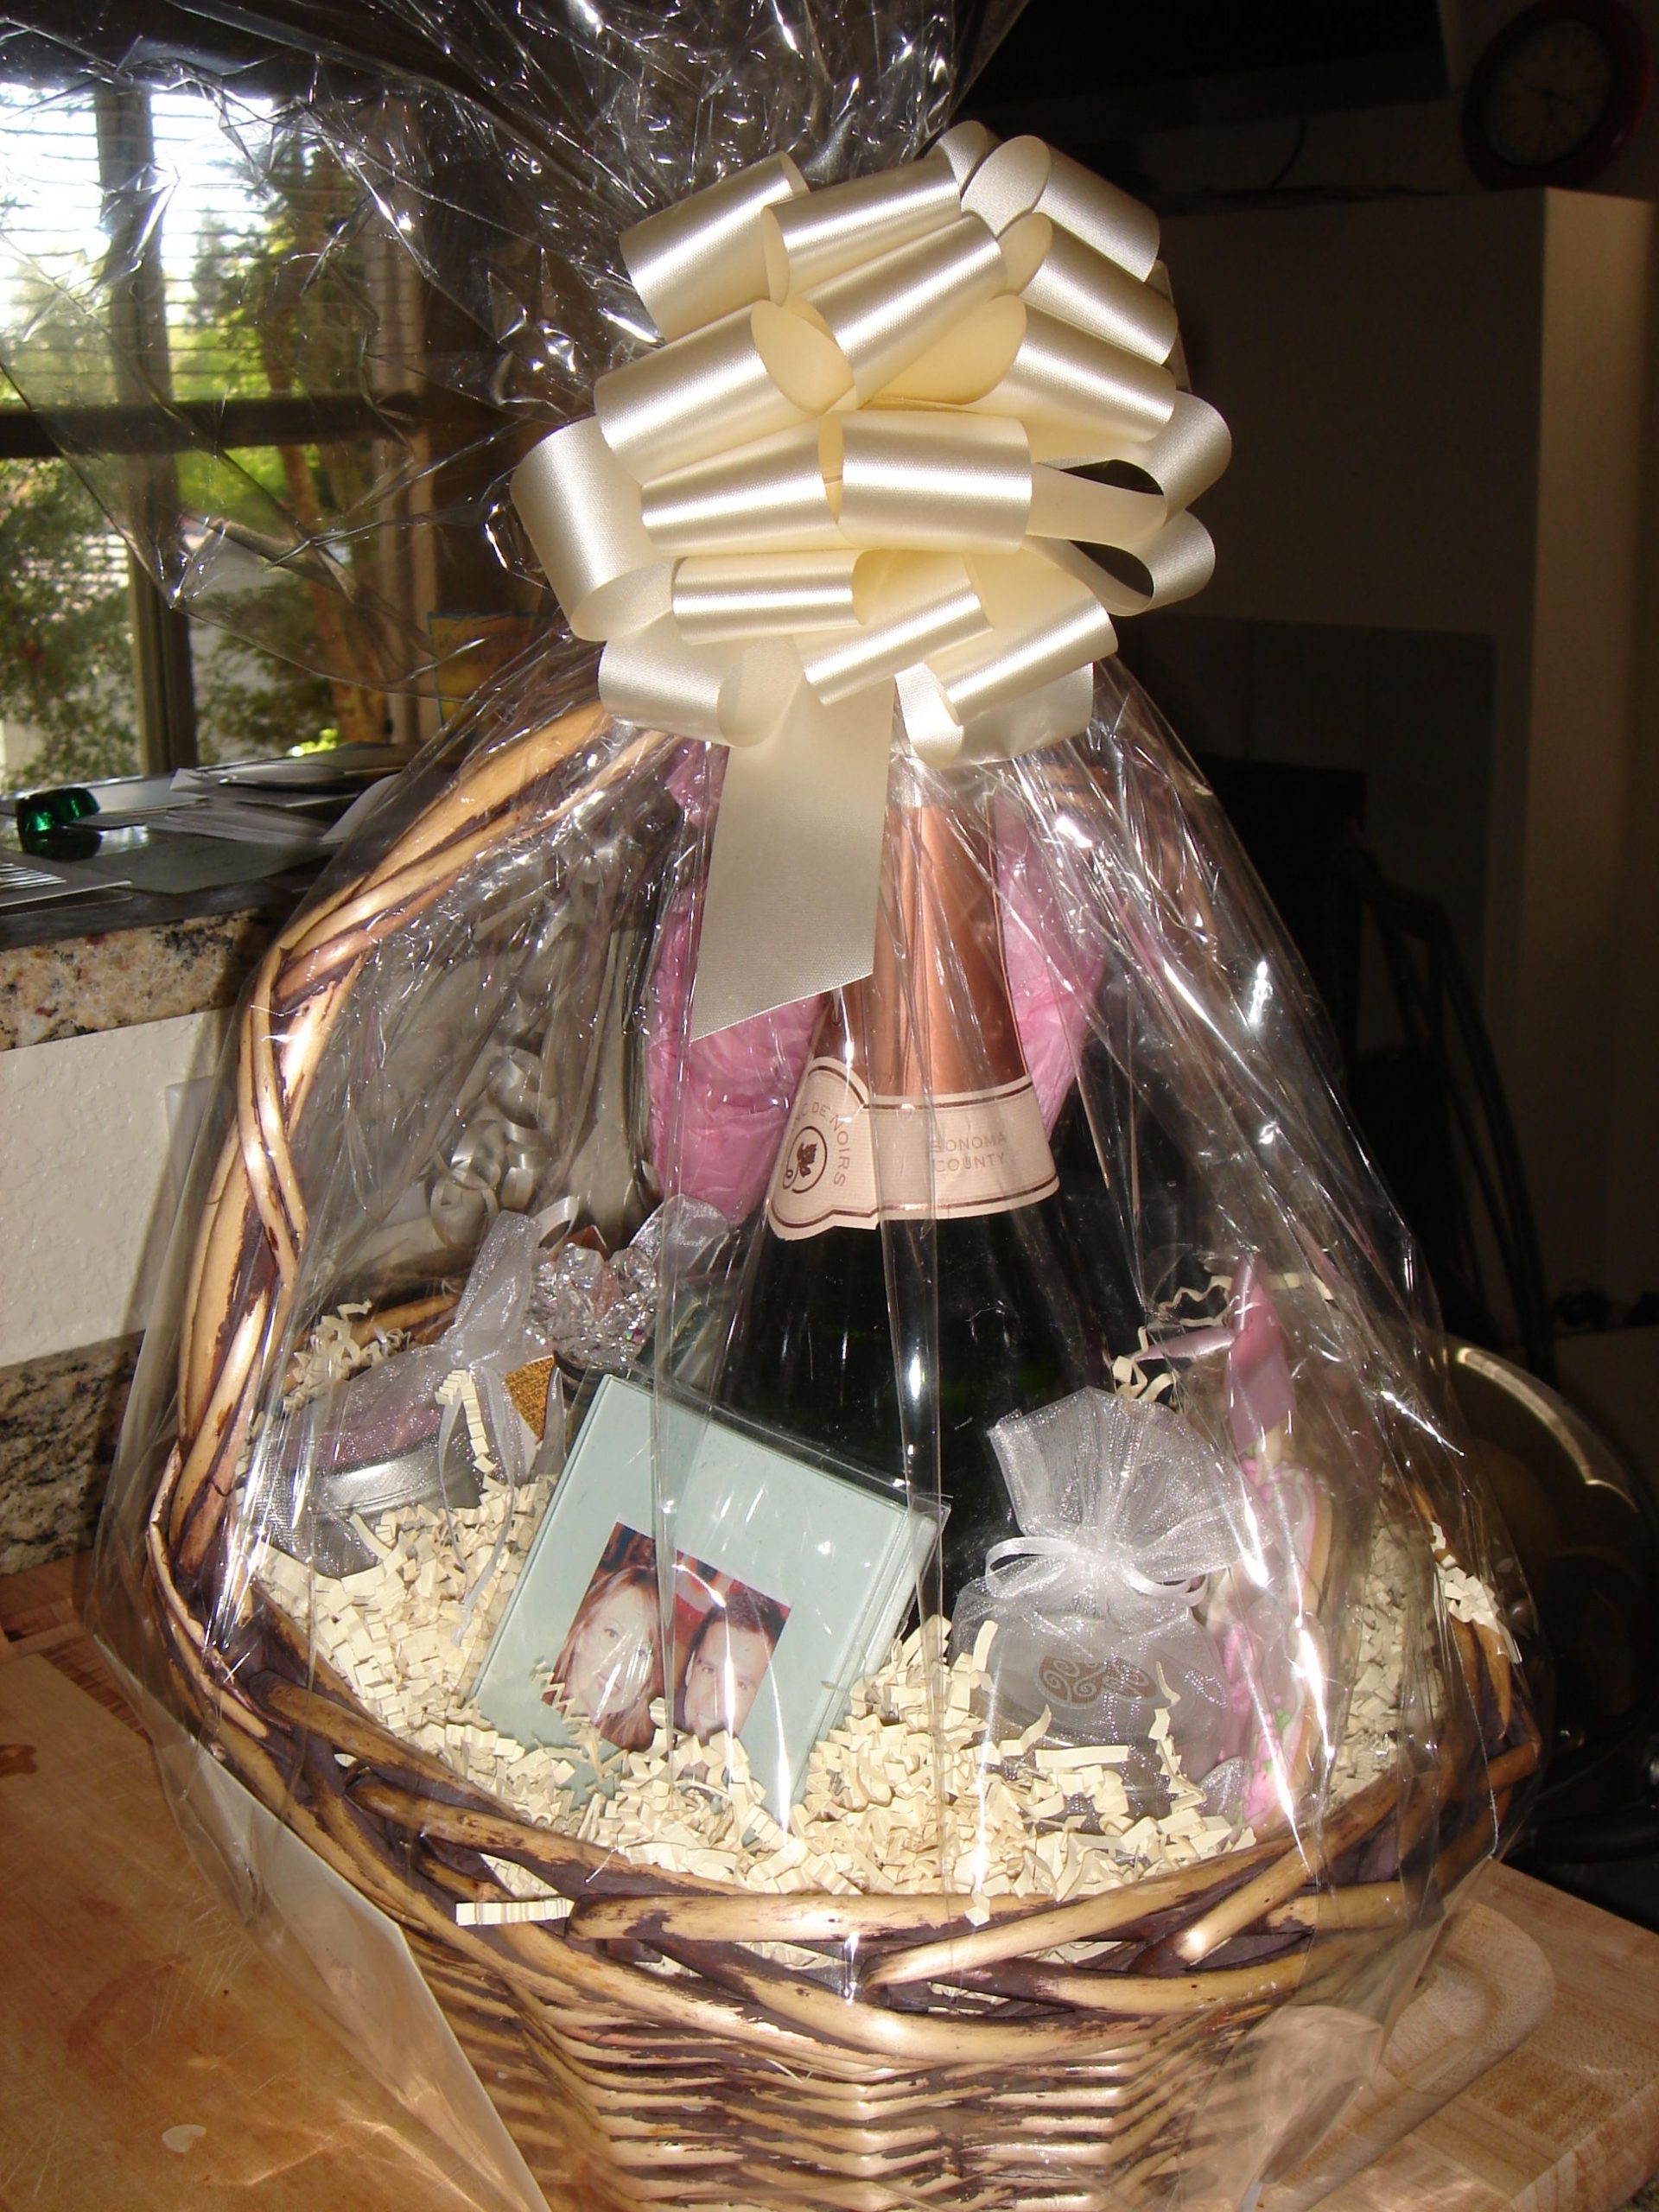 Our wedding favors wine baskets with special goodies!